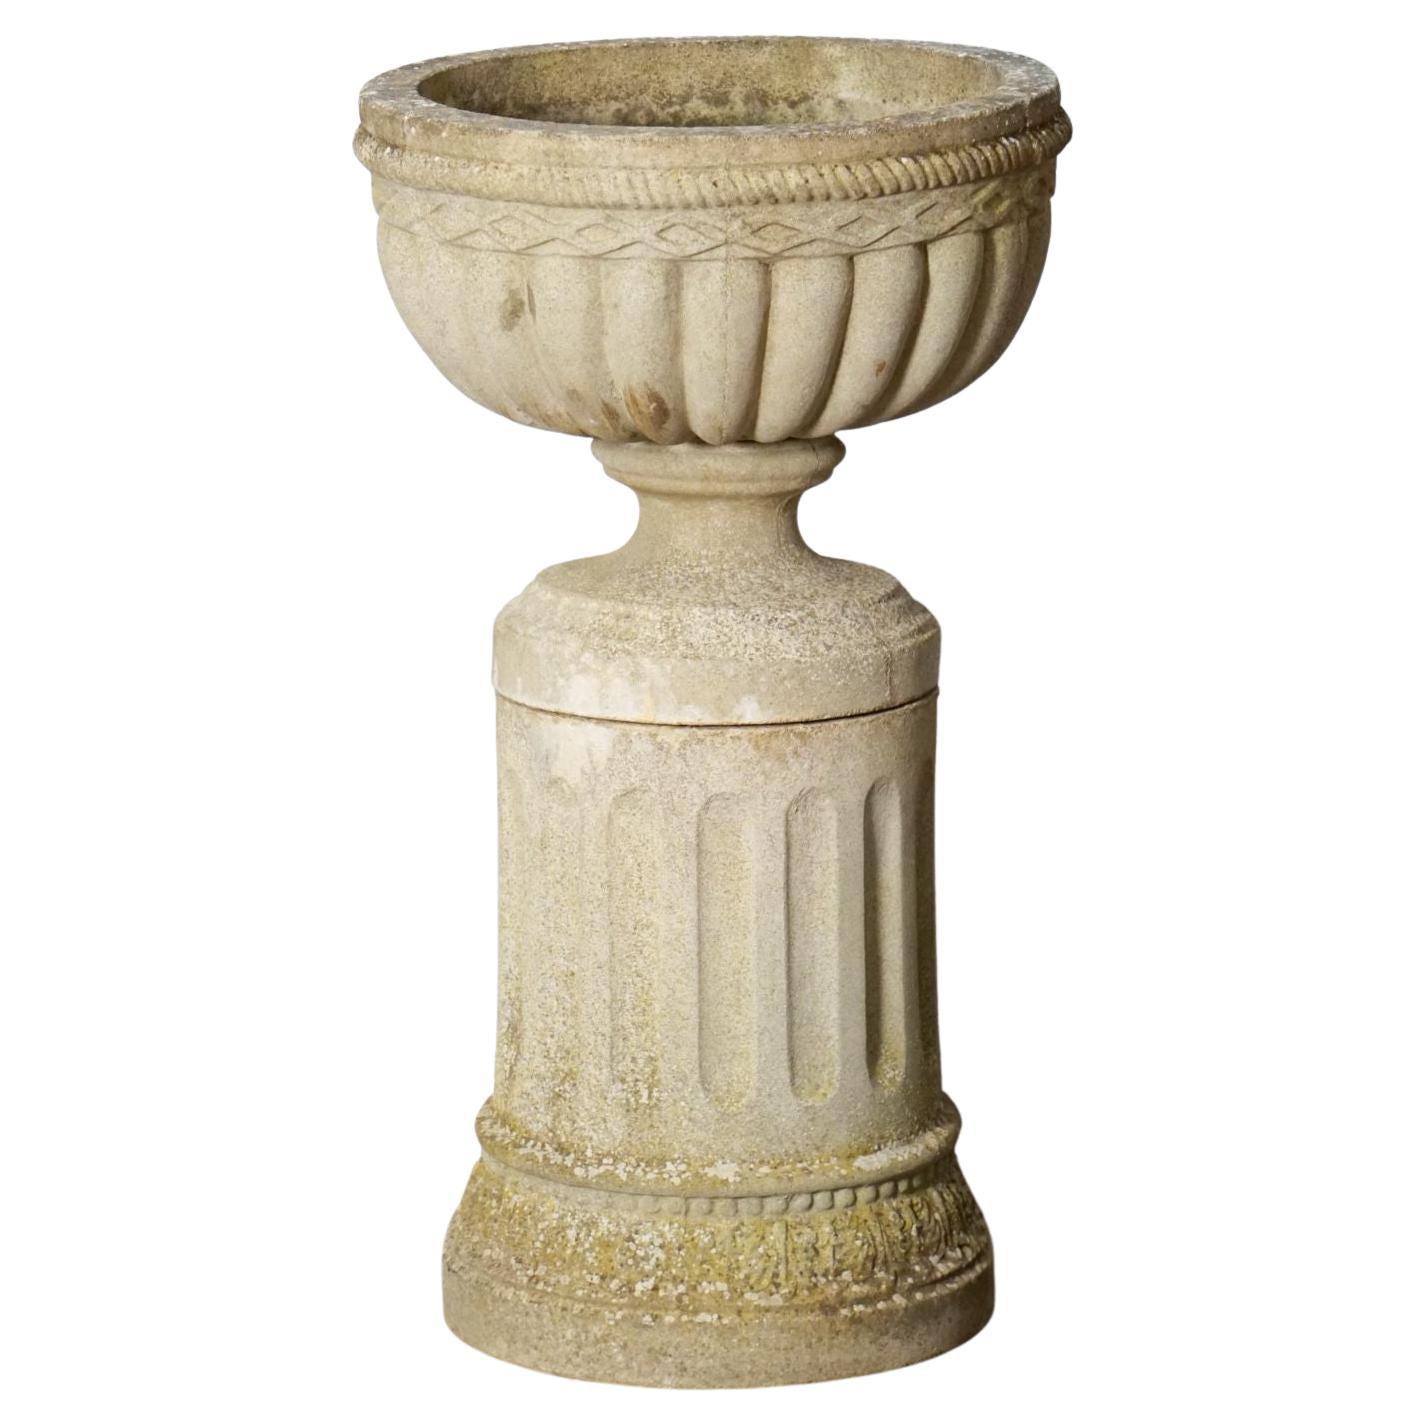 English Garden Stone Urn on Plinth in the Neo-Classical Style